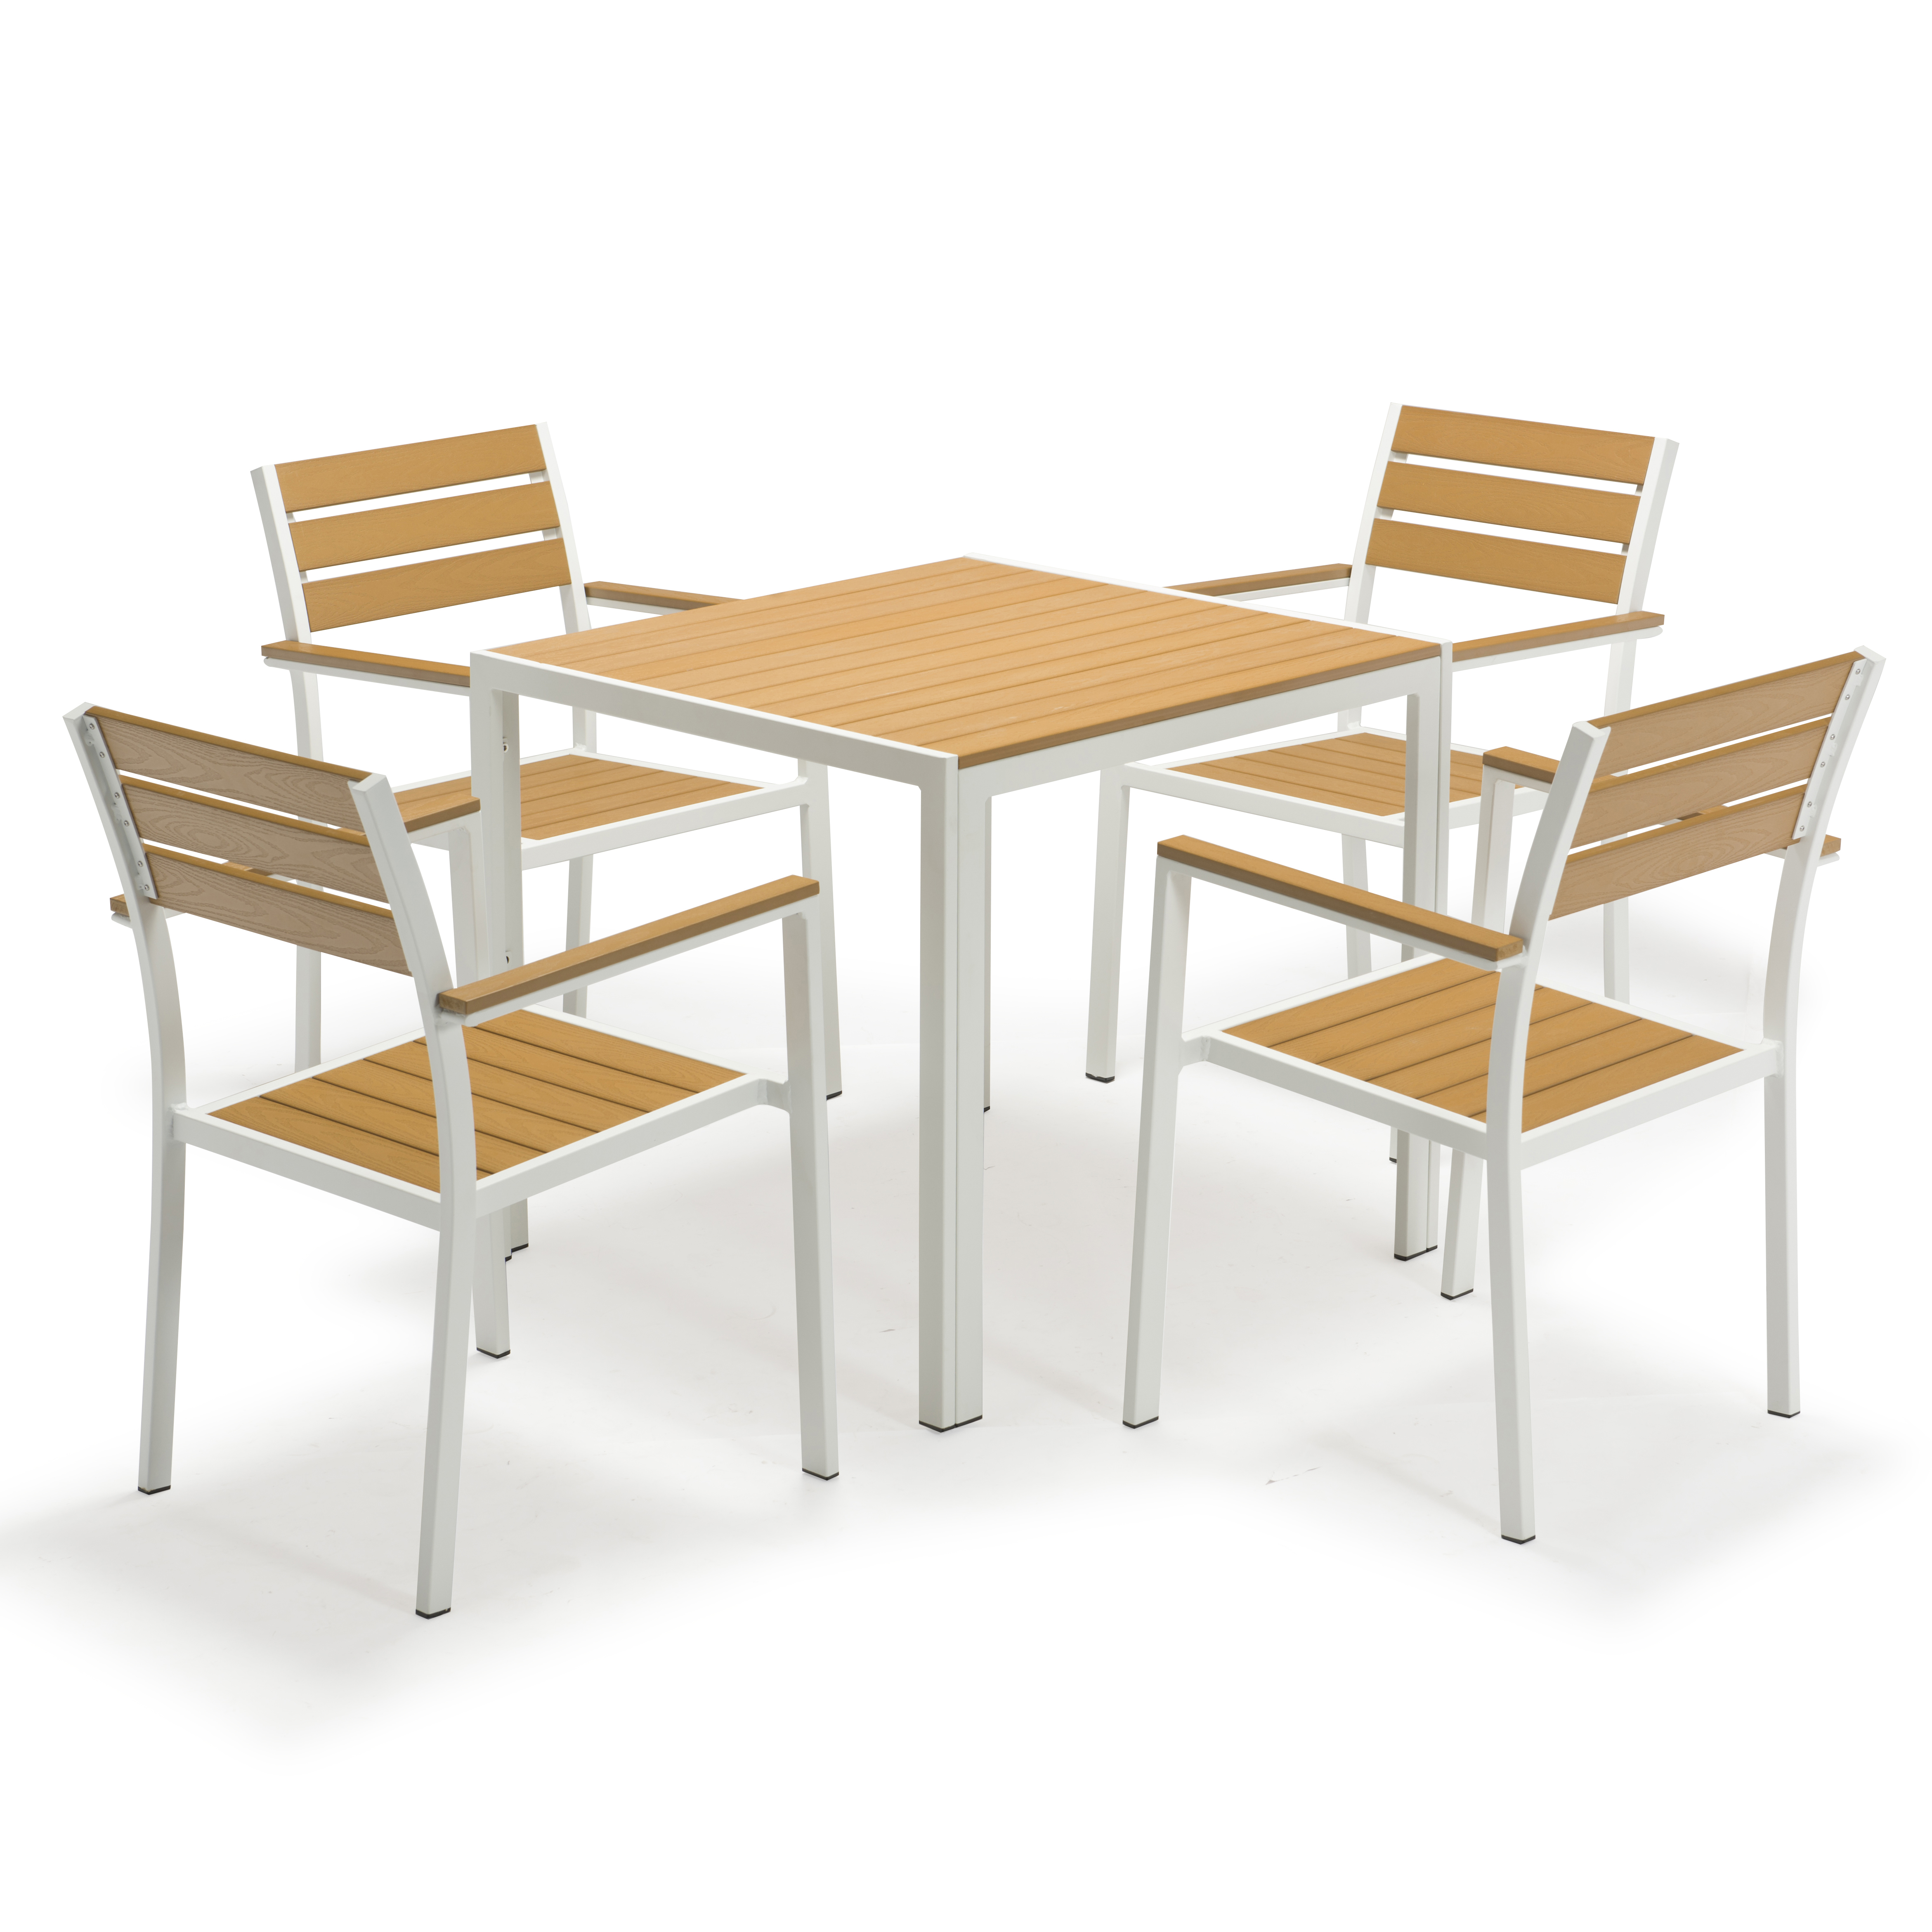 Outdoor plastic wood table and chair set-4 chairs + 1 table